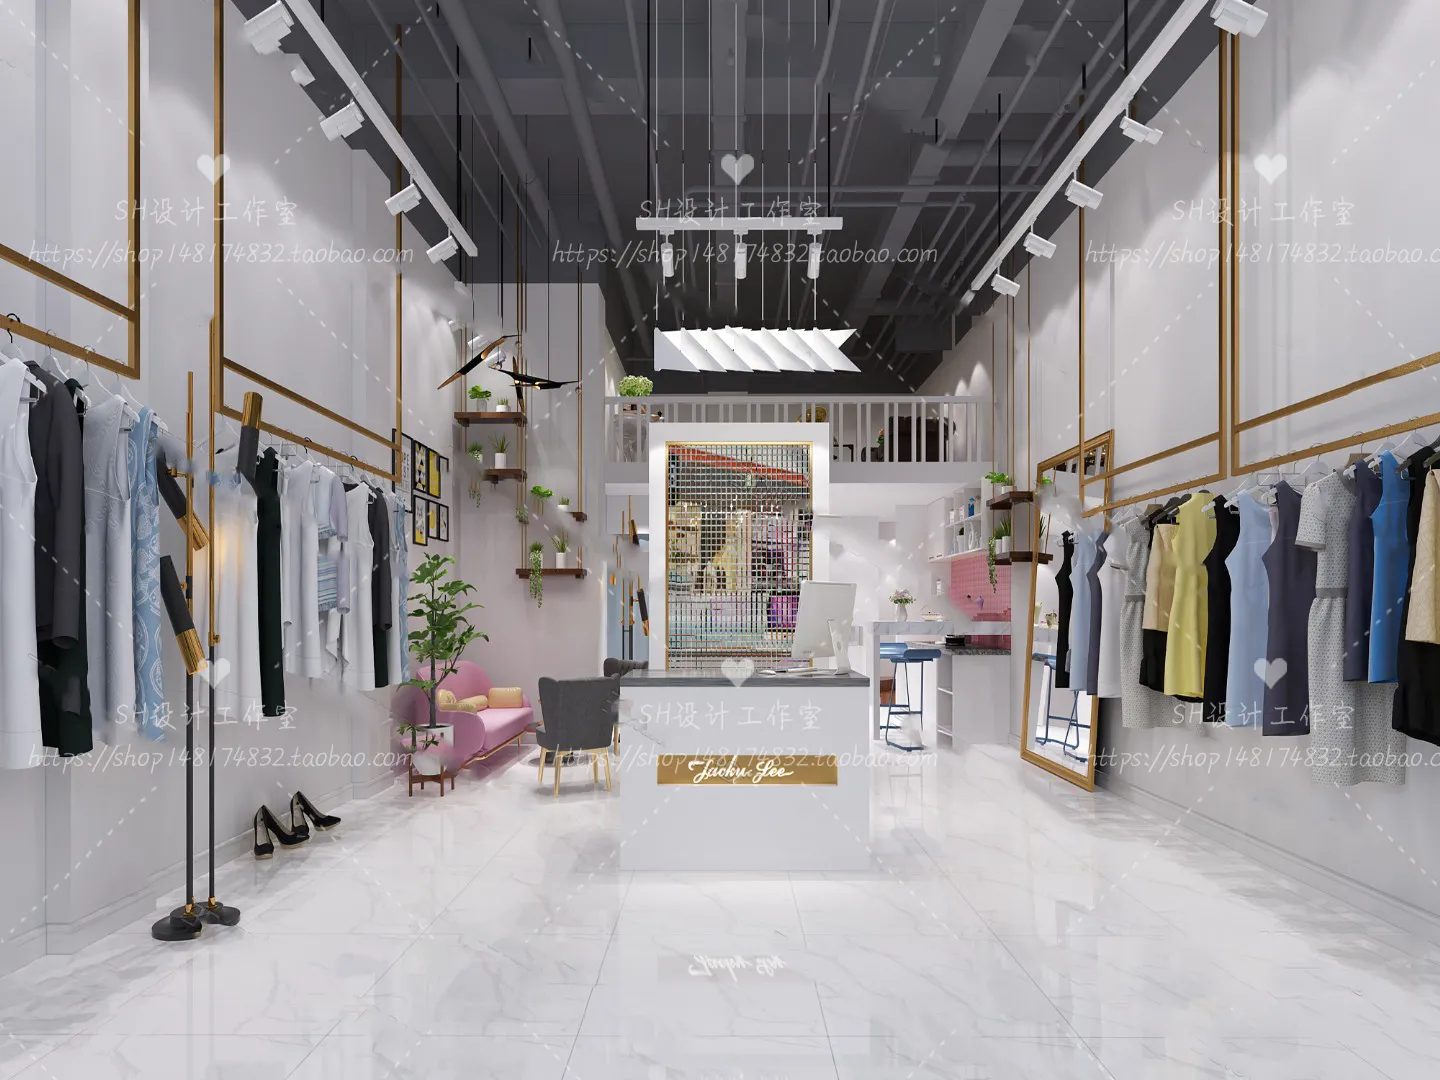 CLOTHING STORE 3D SCENES – VRAY RENDER – 29